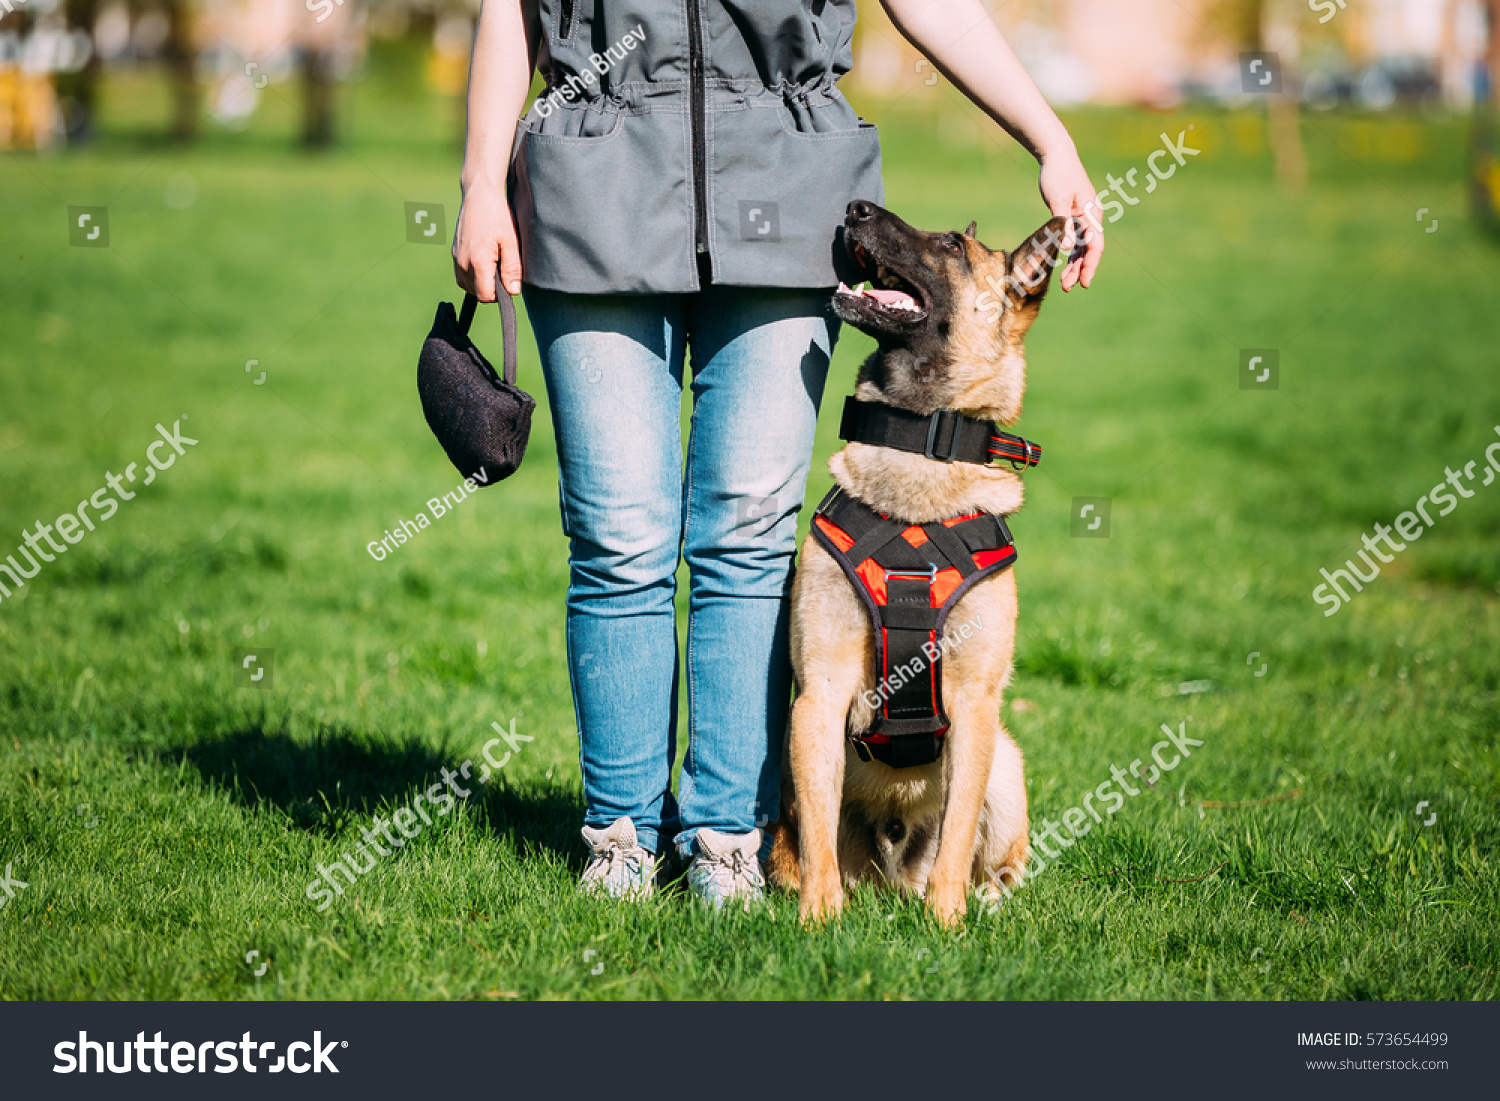 Malinois Dog Sit Outdoors In Green Summer Grass Near Owner At Training. Well-raised and trained Belgian Malinois are usually active, intelligent, friendly, protective, alert and hard-working. #573654499